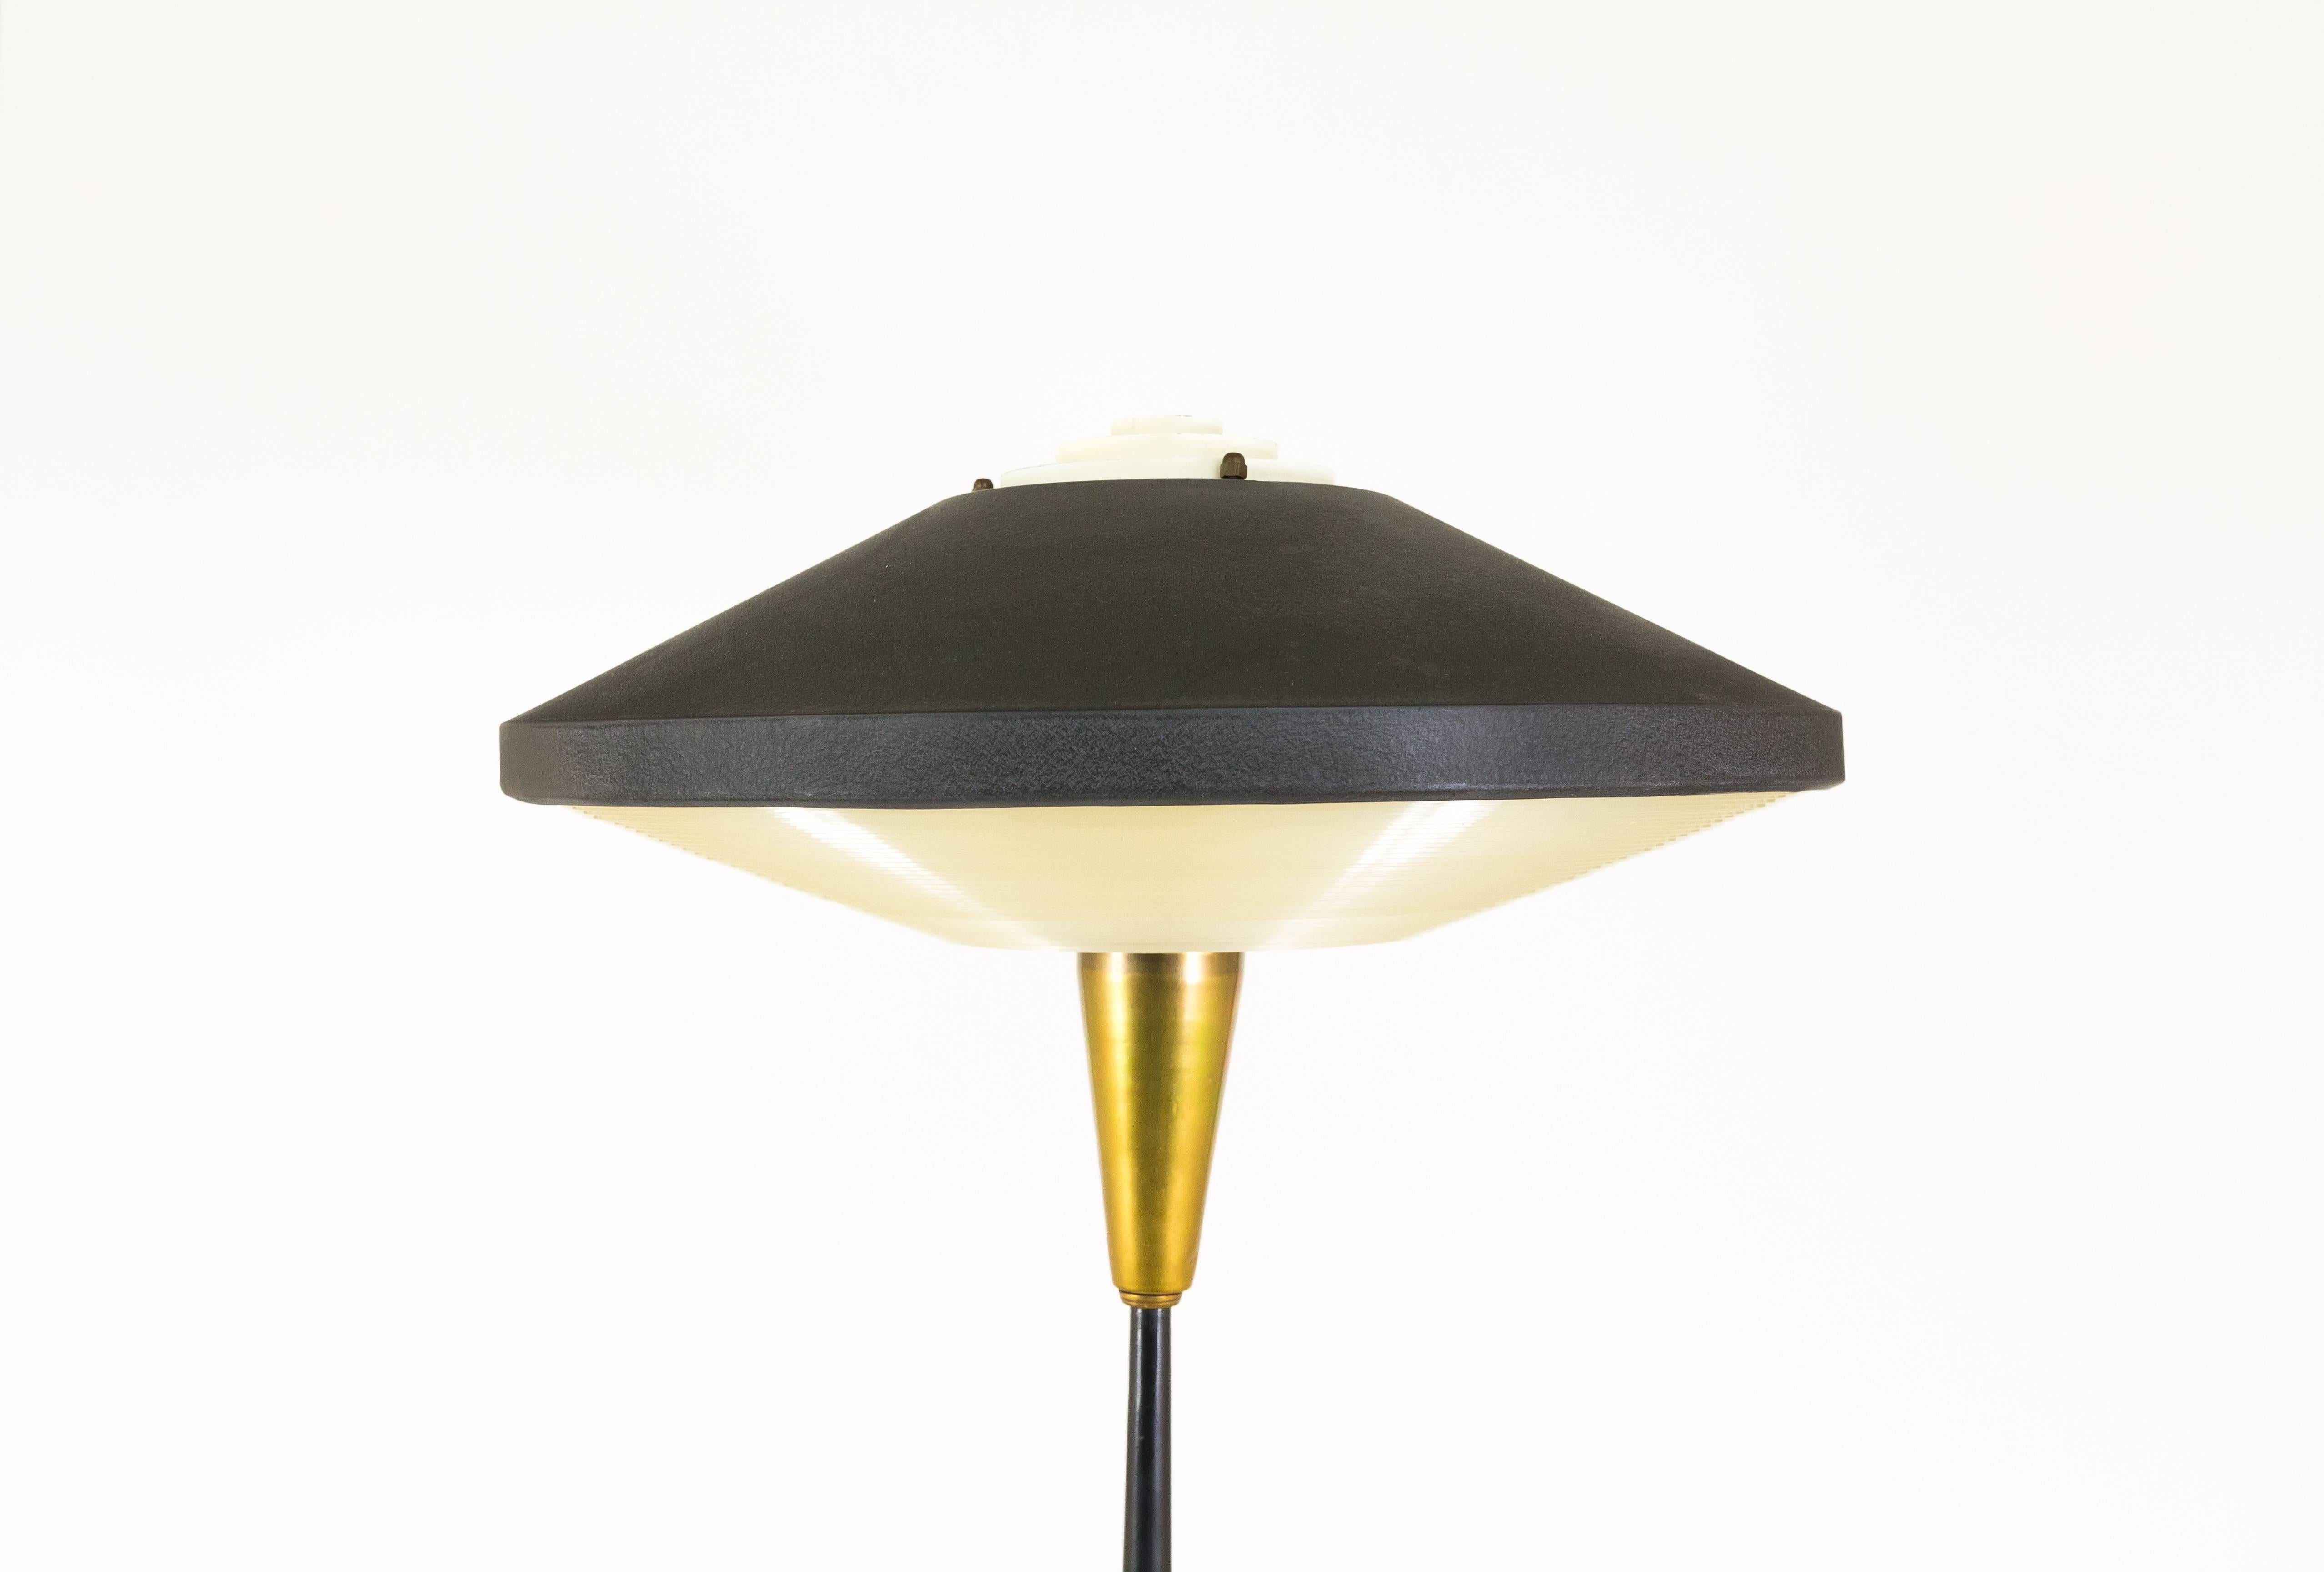 A rare floor lamp NX 546 E/00 by Louis Kalff for Philips Eindhoven. Equipped with a black coated metal hood, with a small metal diffuser in the middle and at the bottom of the hood a Plexiglass diffuser. This allows the light to spread nicely at